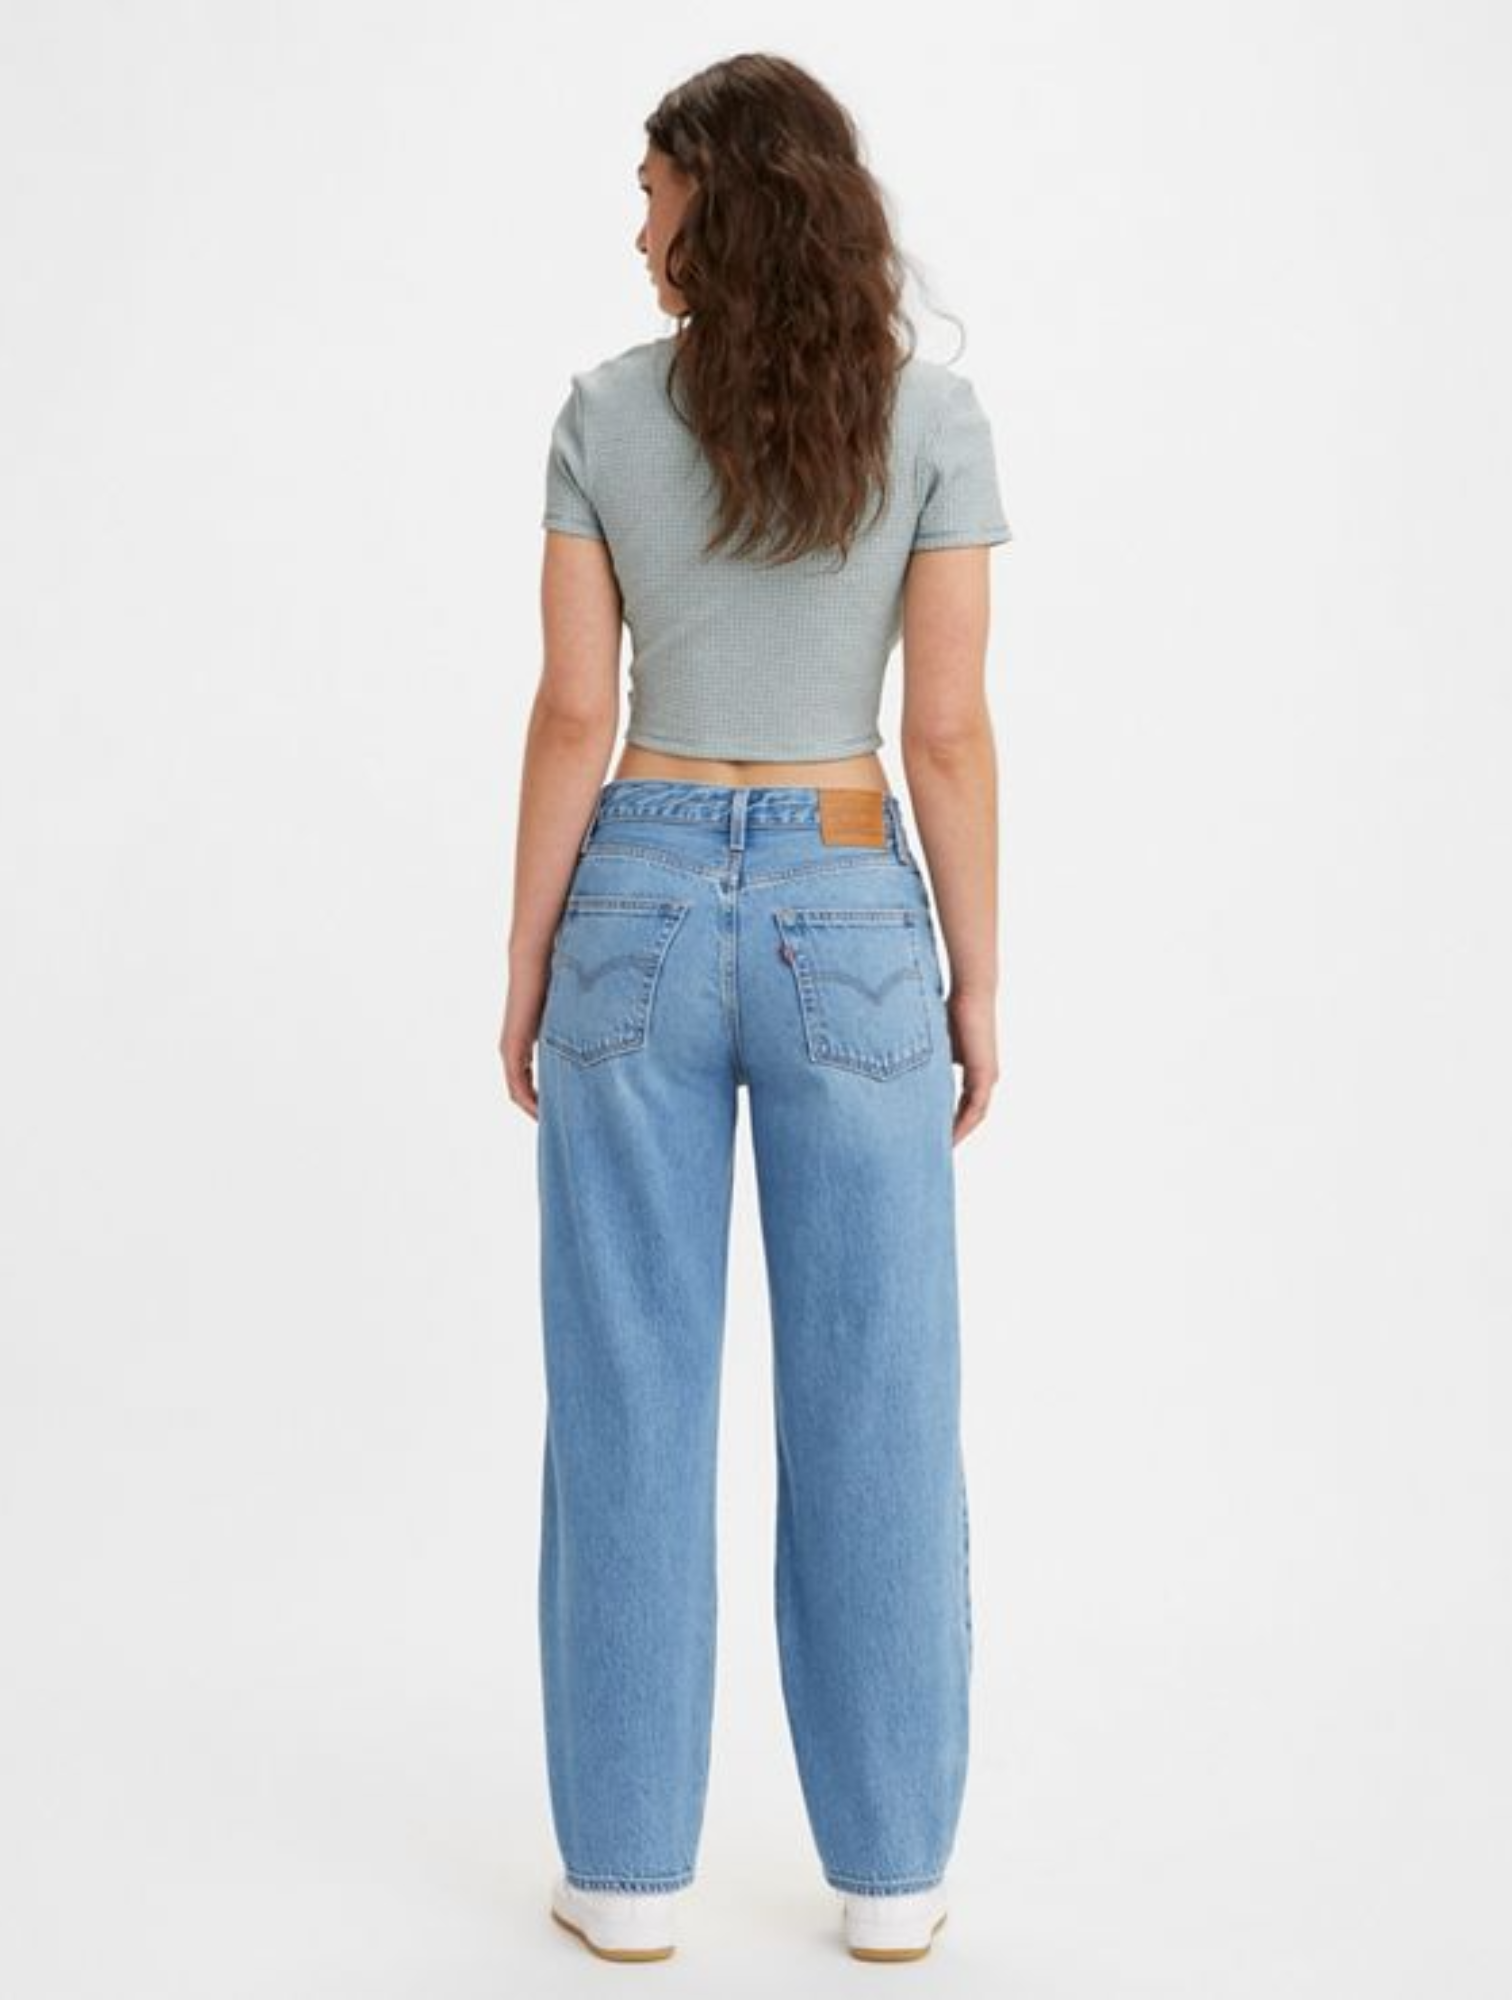 BAGGY DAD JEANS - IN THE MIDDLE W DAMAGE I LEVI'S - Momentum Clothing